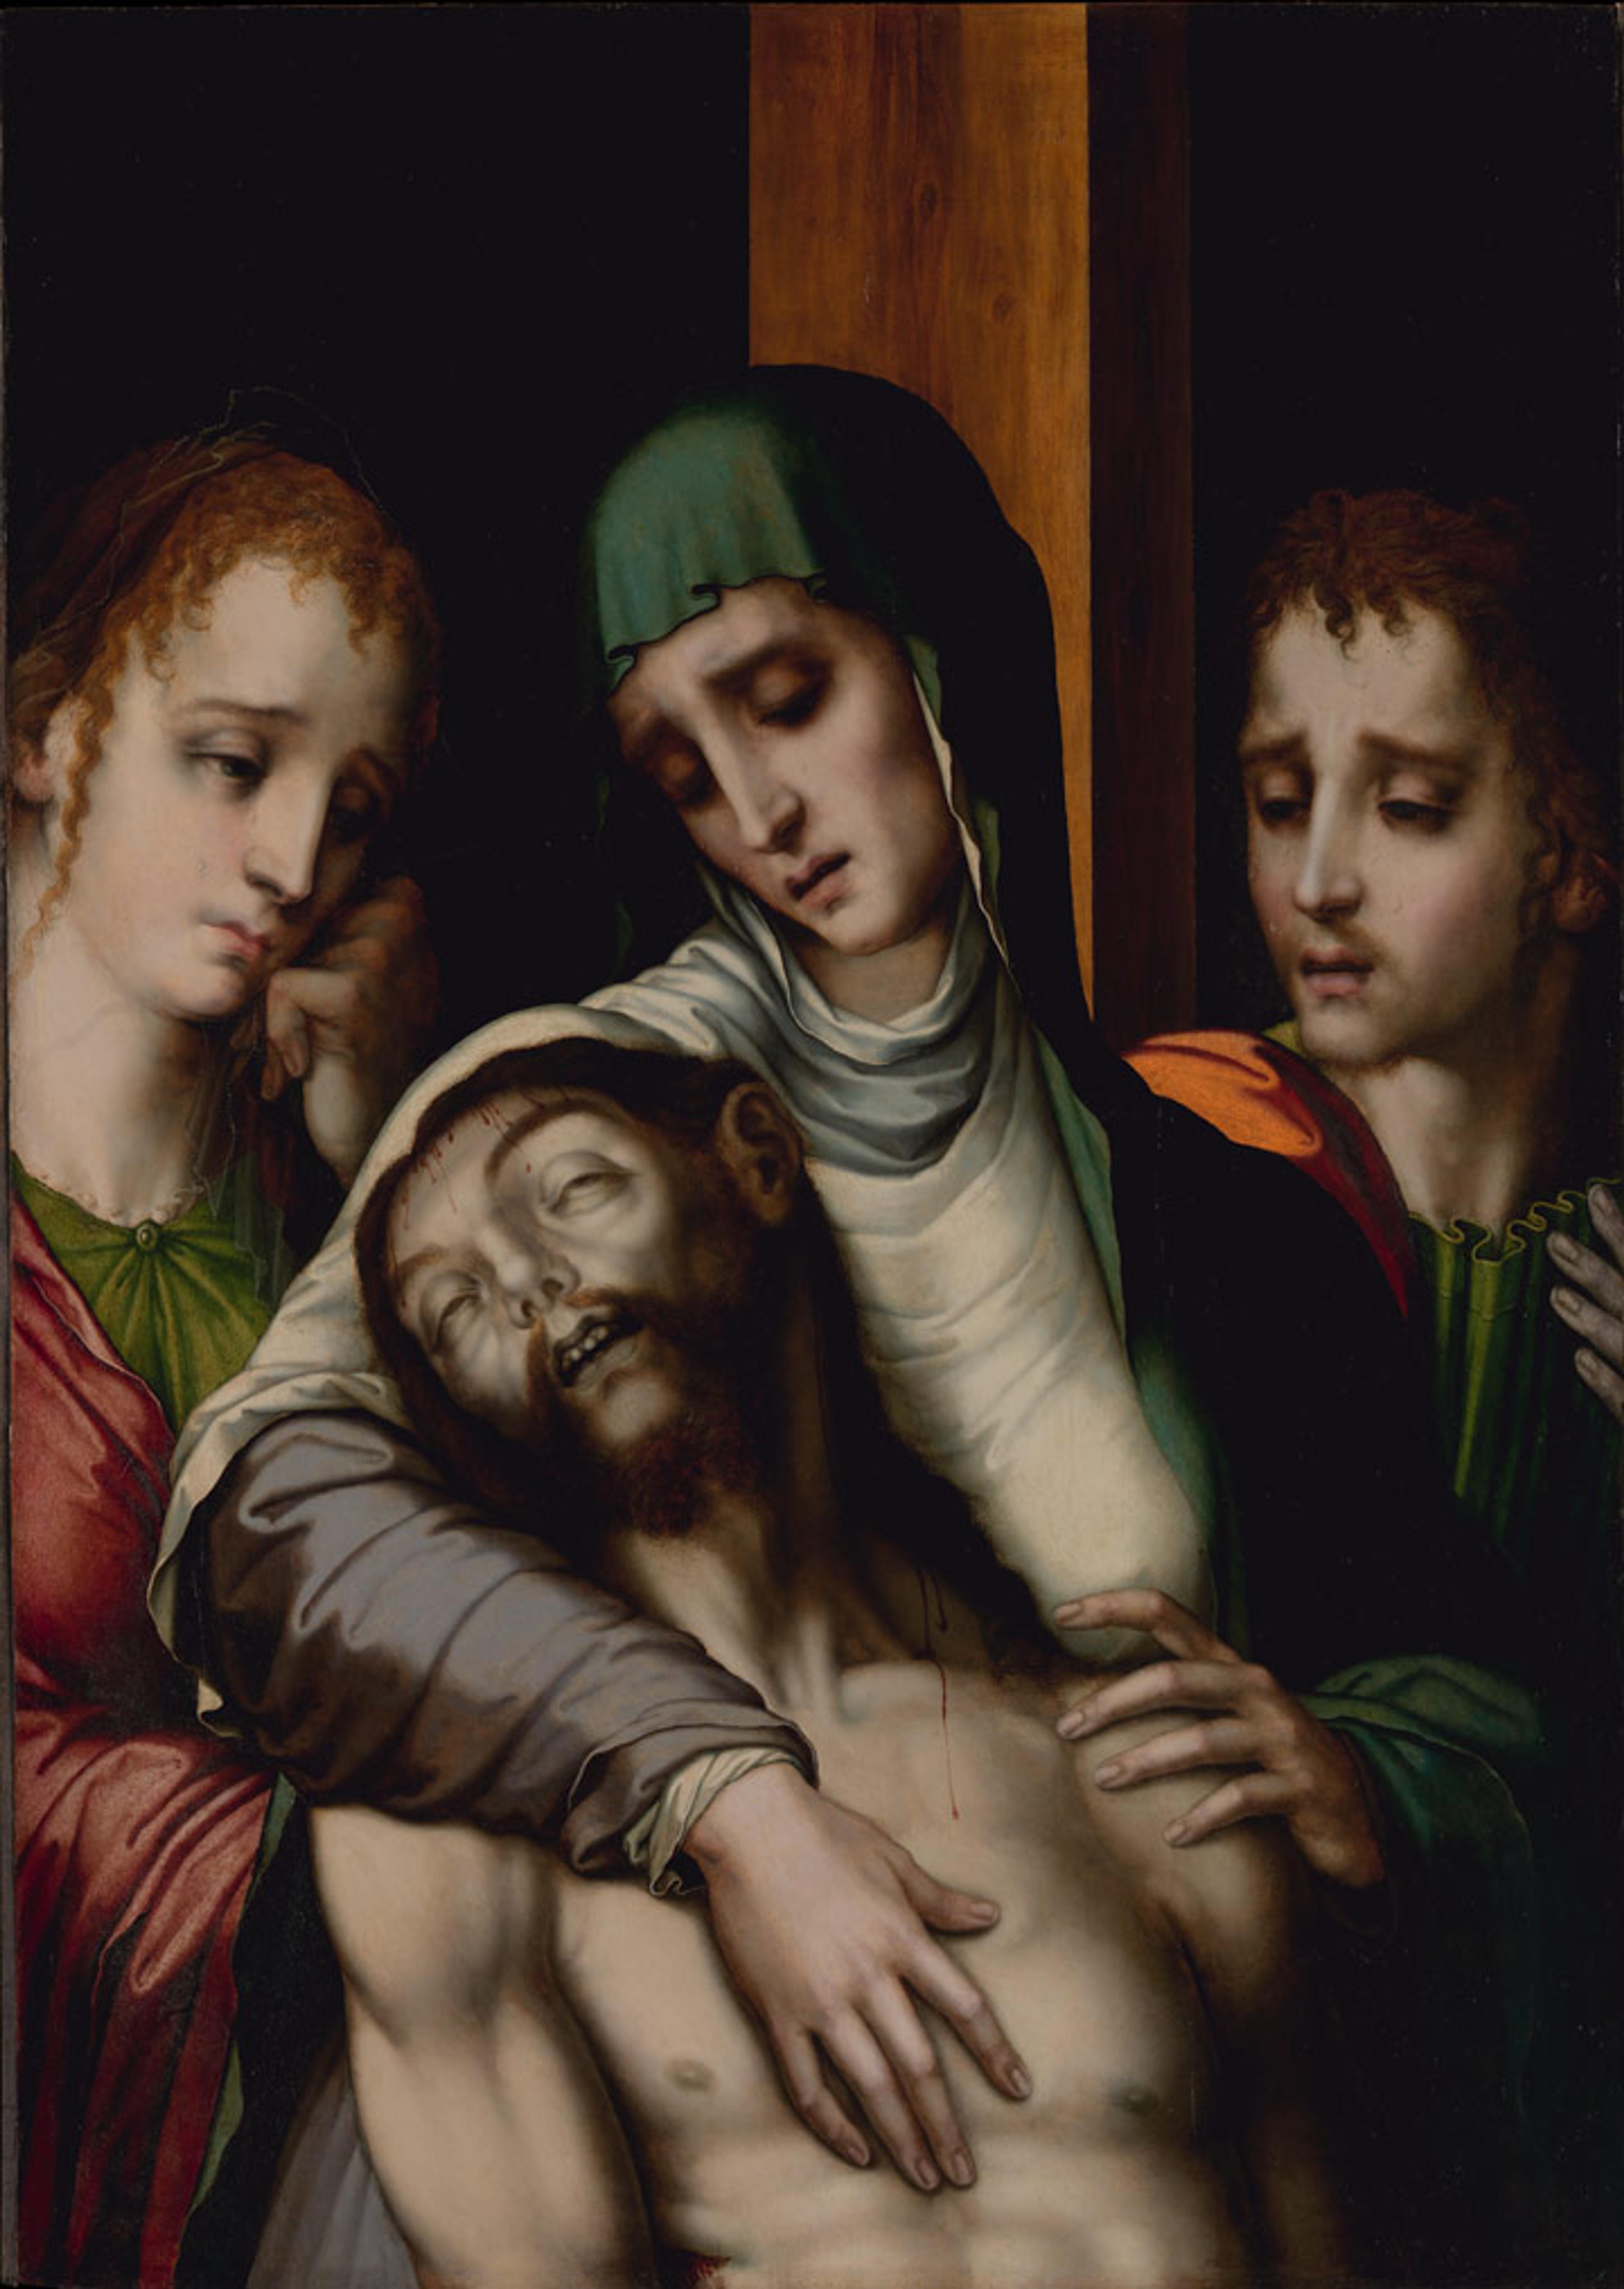 Sixteenth-century painting depicting the Lamentation, with Christ seen laying across the Virgin's body as Mary Magdalen and Saint John look on and weep 